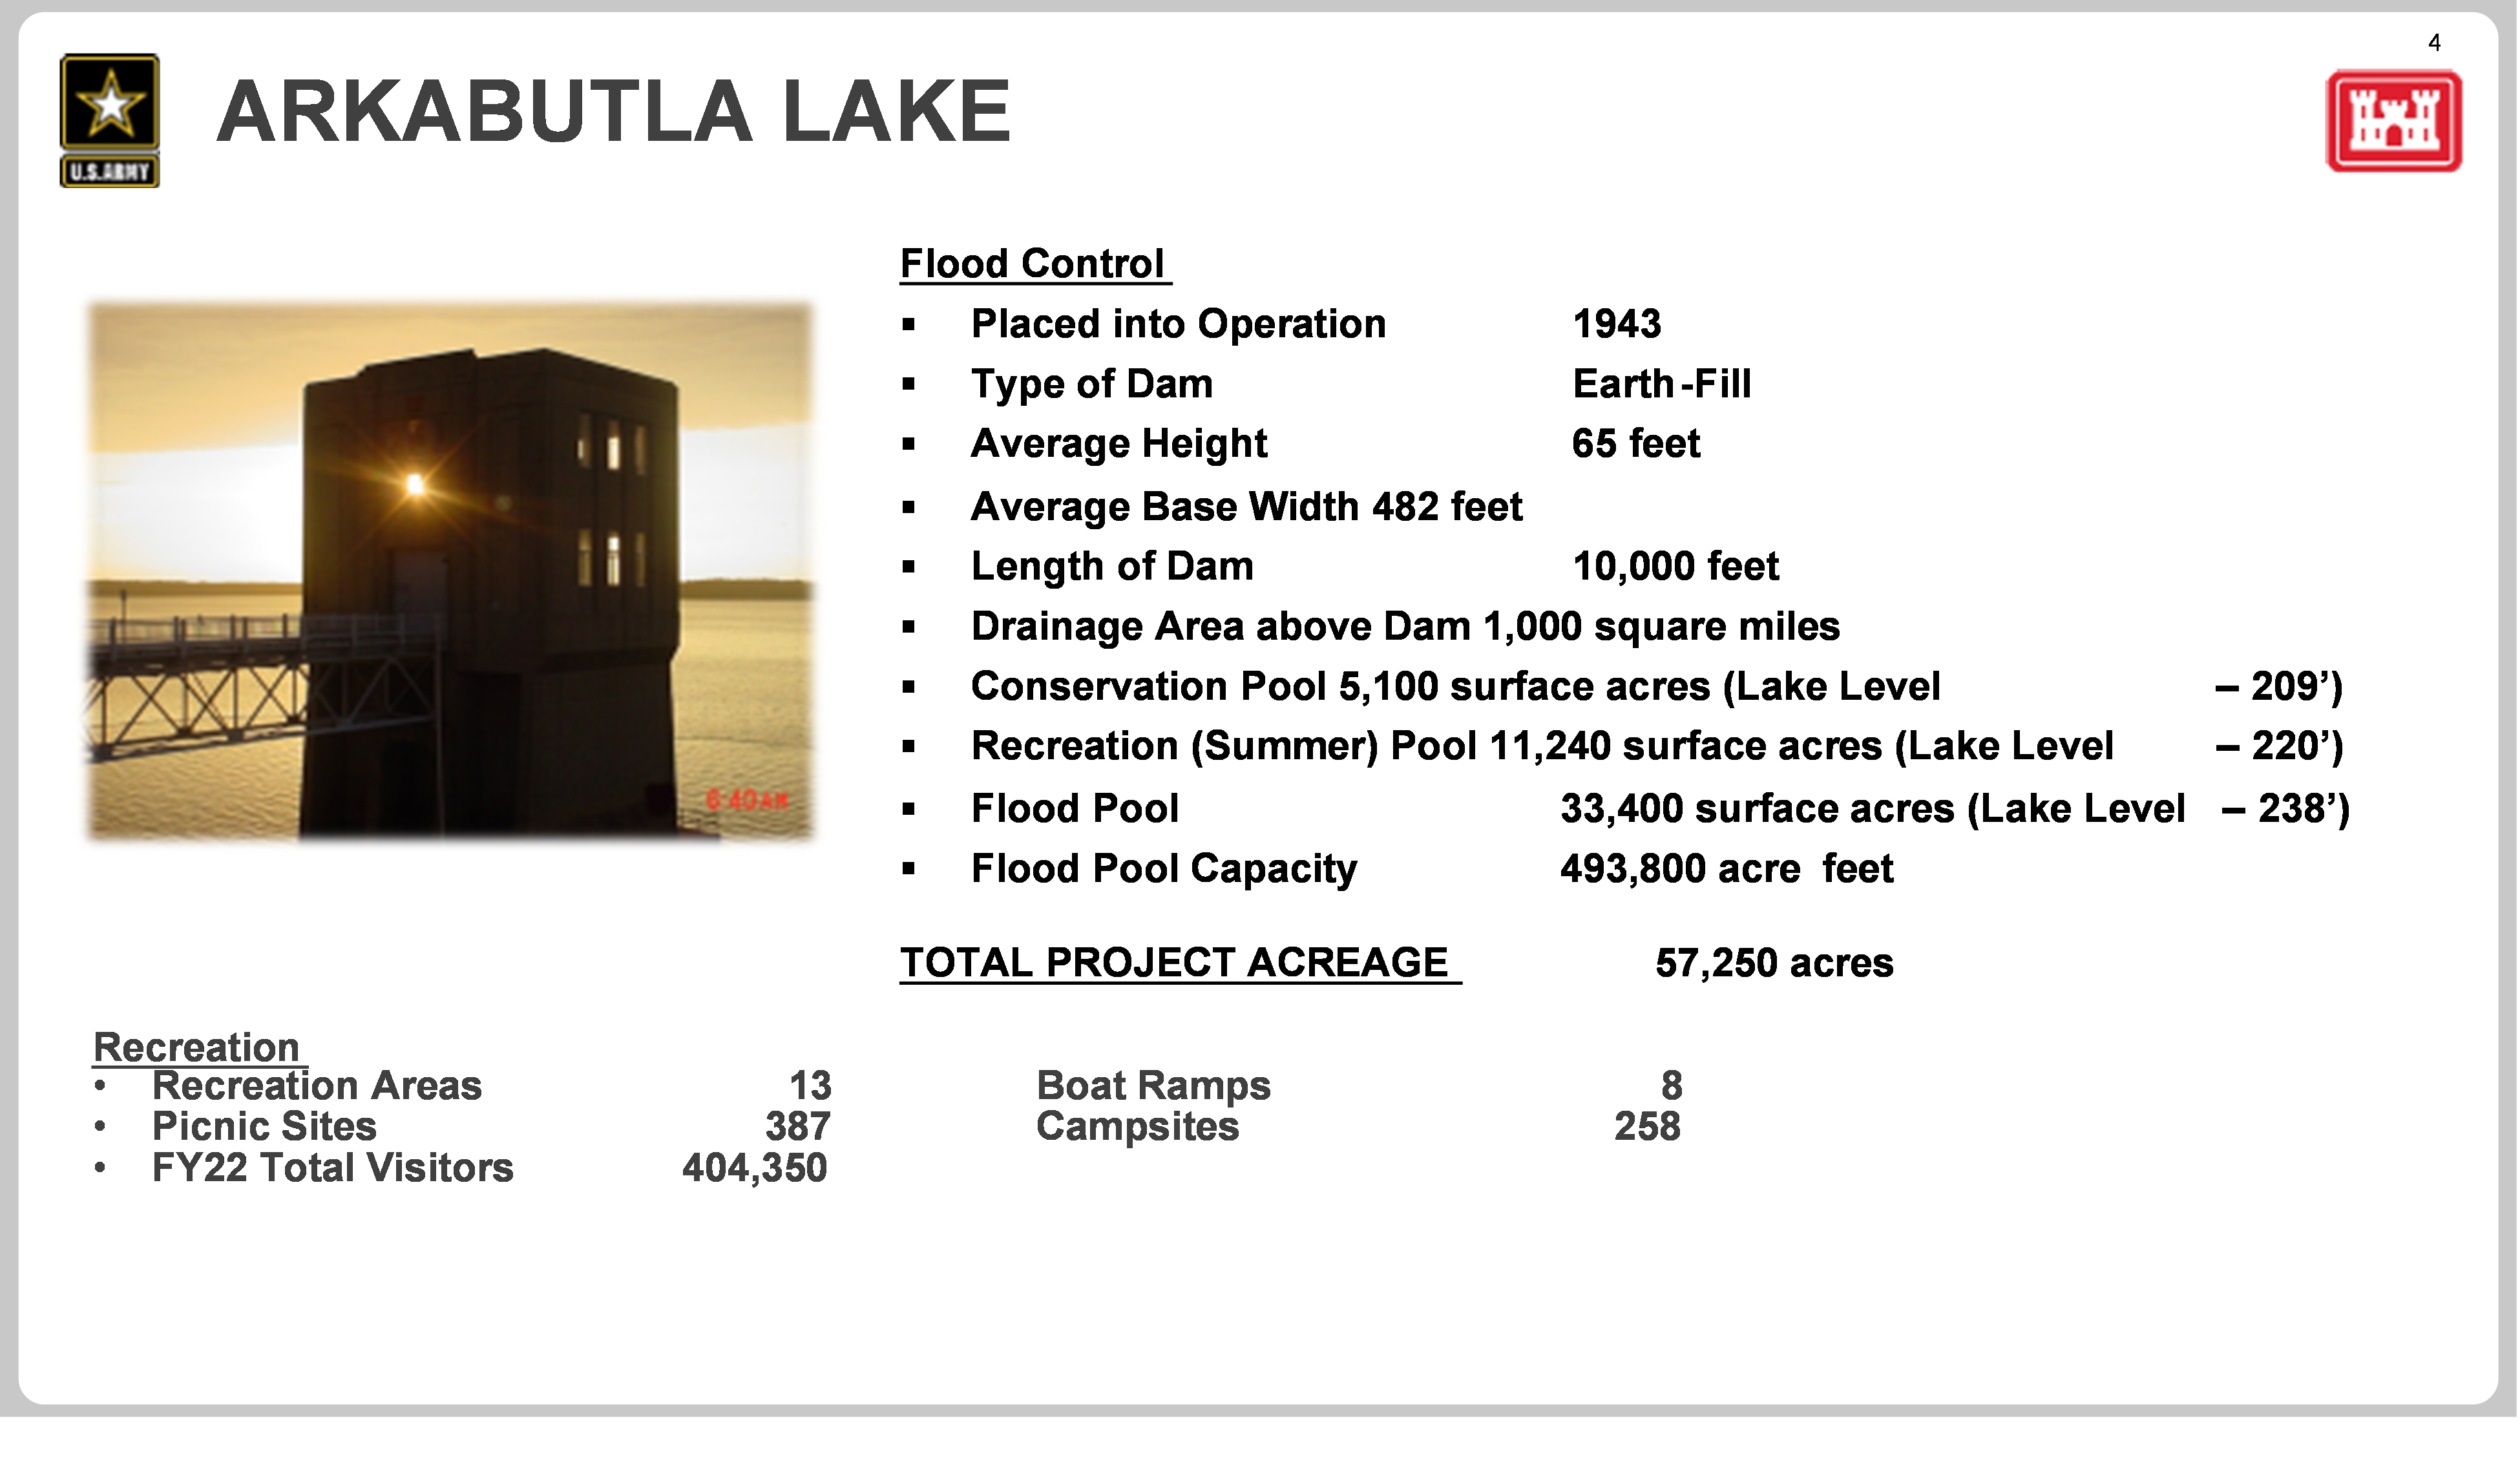 A graphical image containing facts about Arkabutla Lake